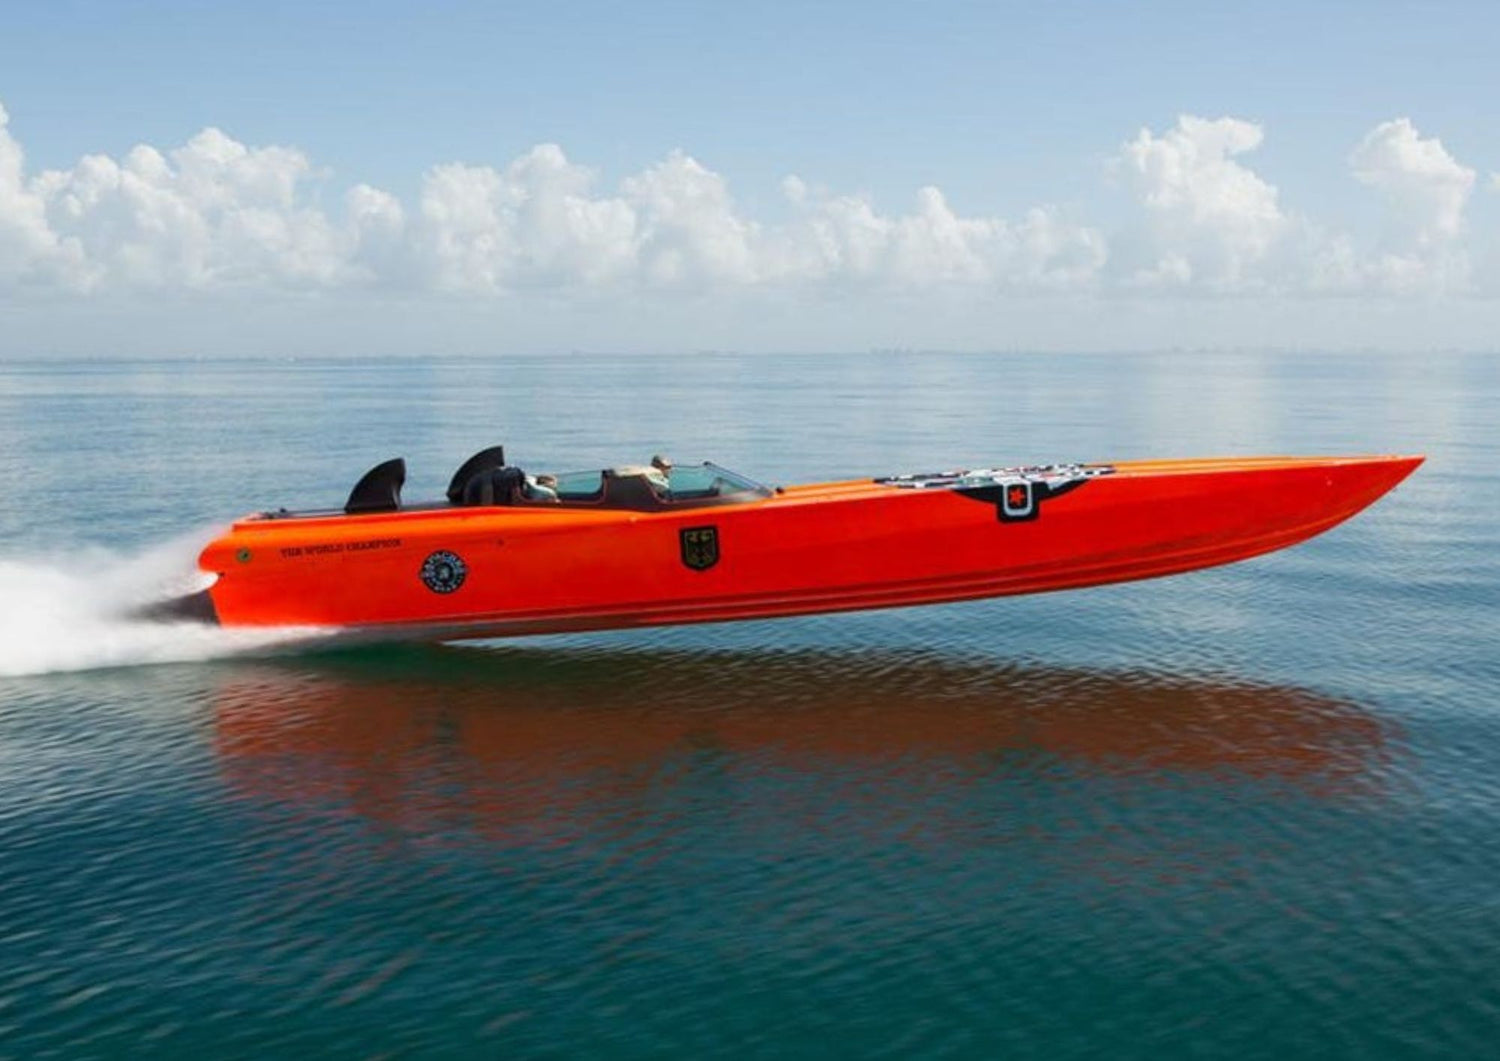 This 2,700 hp race boat just broke the record from Florida to Cuba